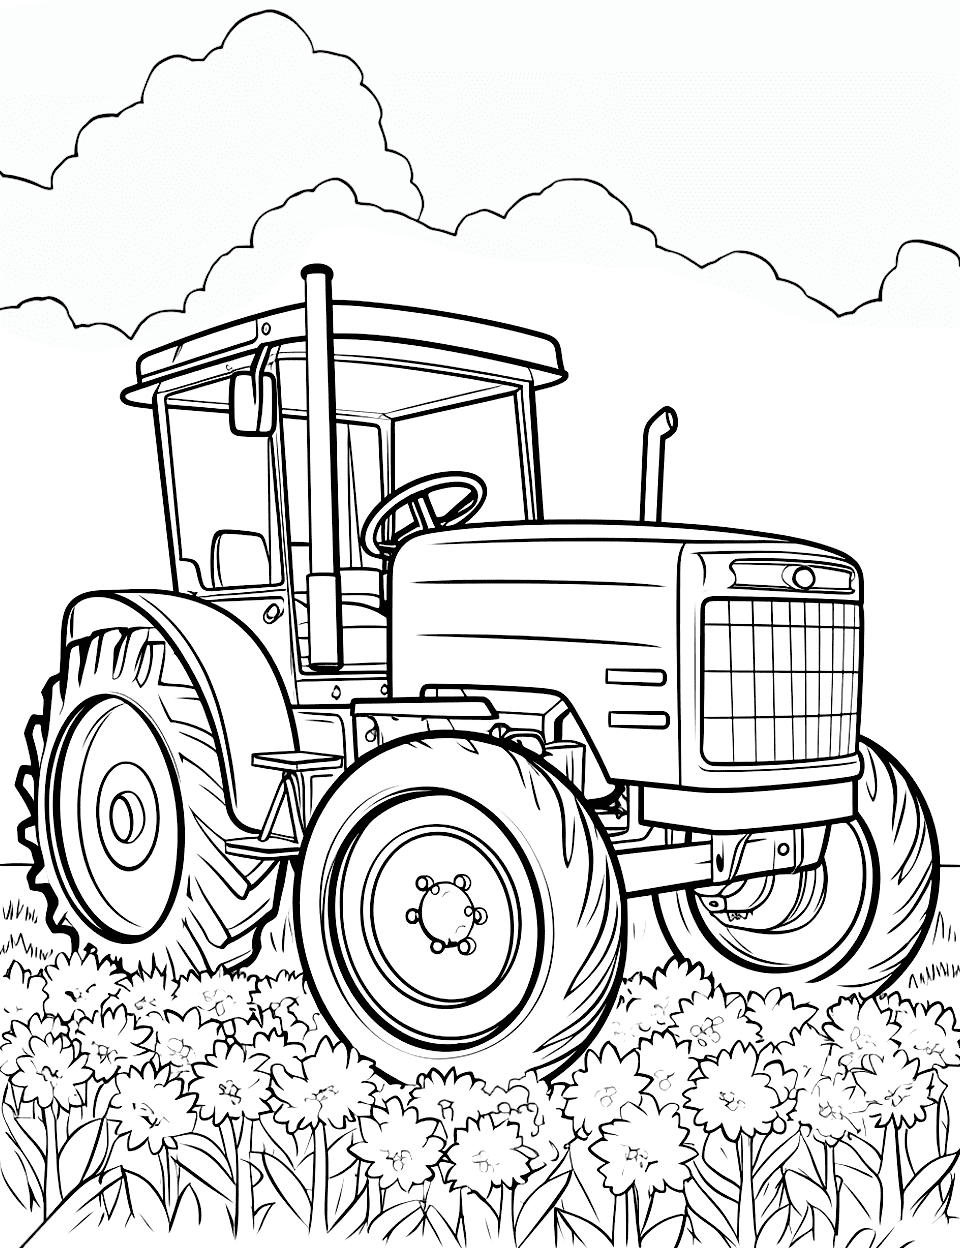 Tractor with Flowers Coloring Page - A scene where a tractor is surrounded by a field of tall flowers.